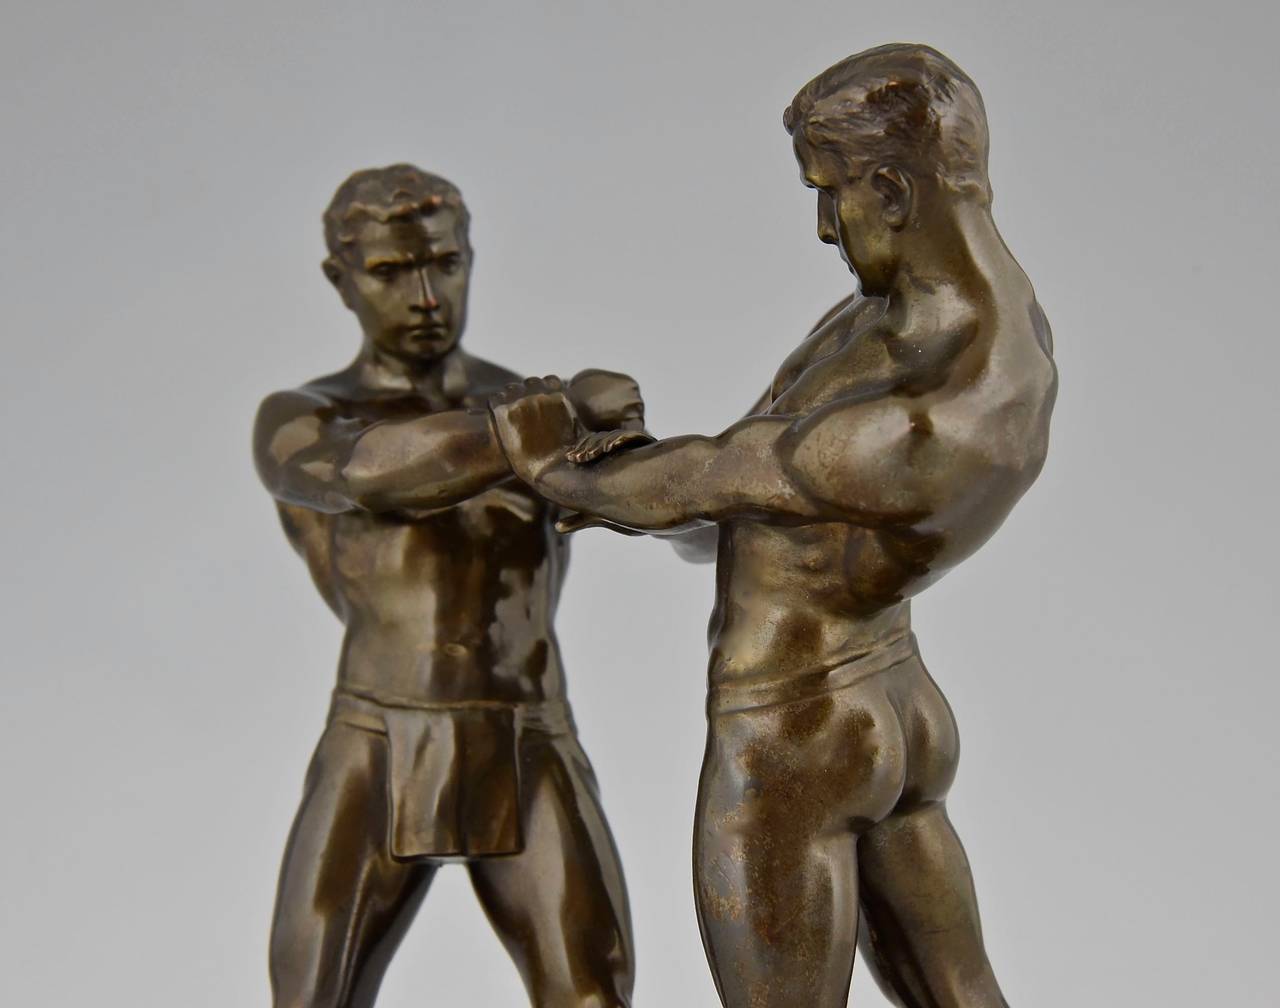 Patinated Antique Sculpture of Two Wrestlers, Germany 1910